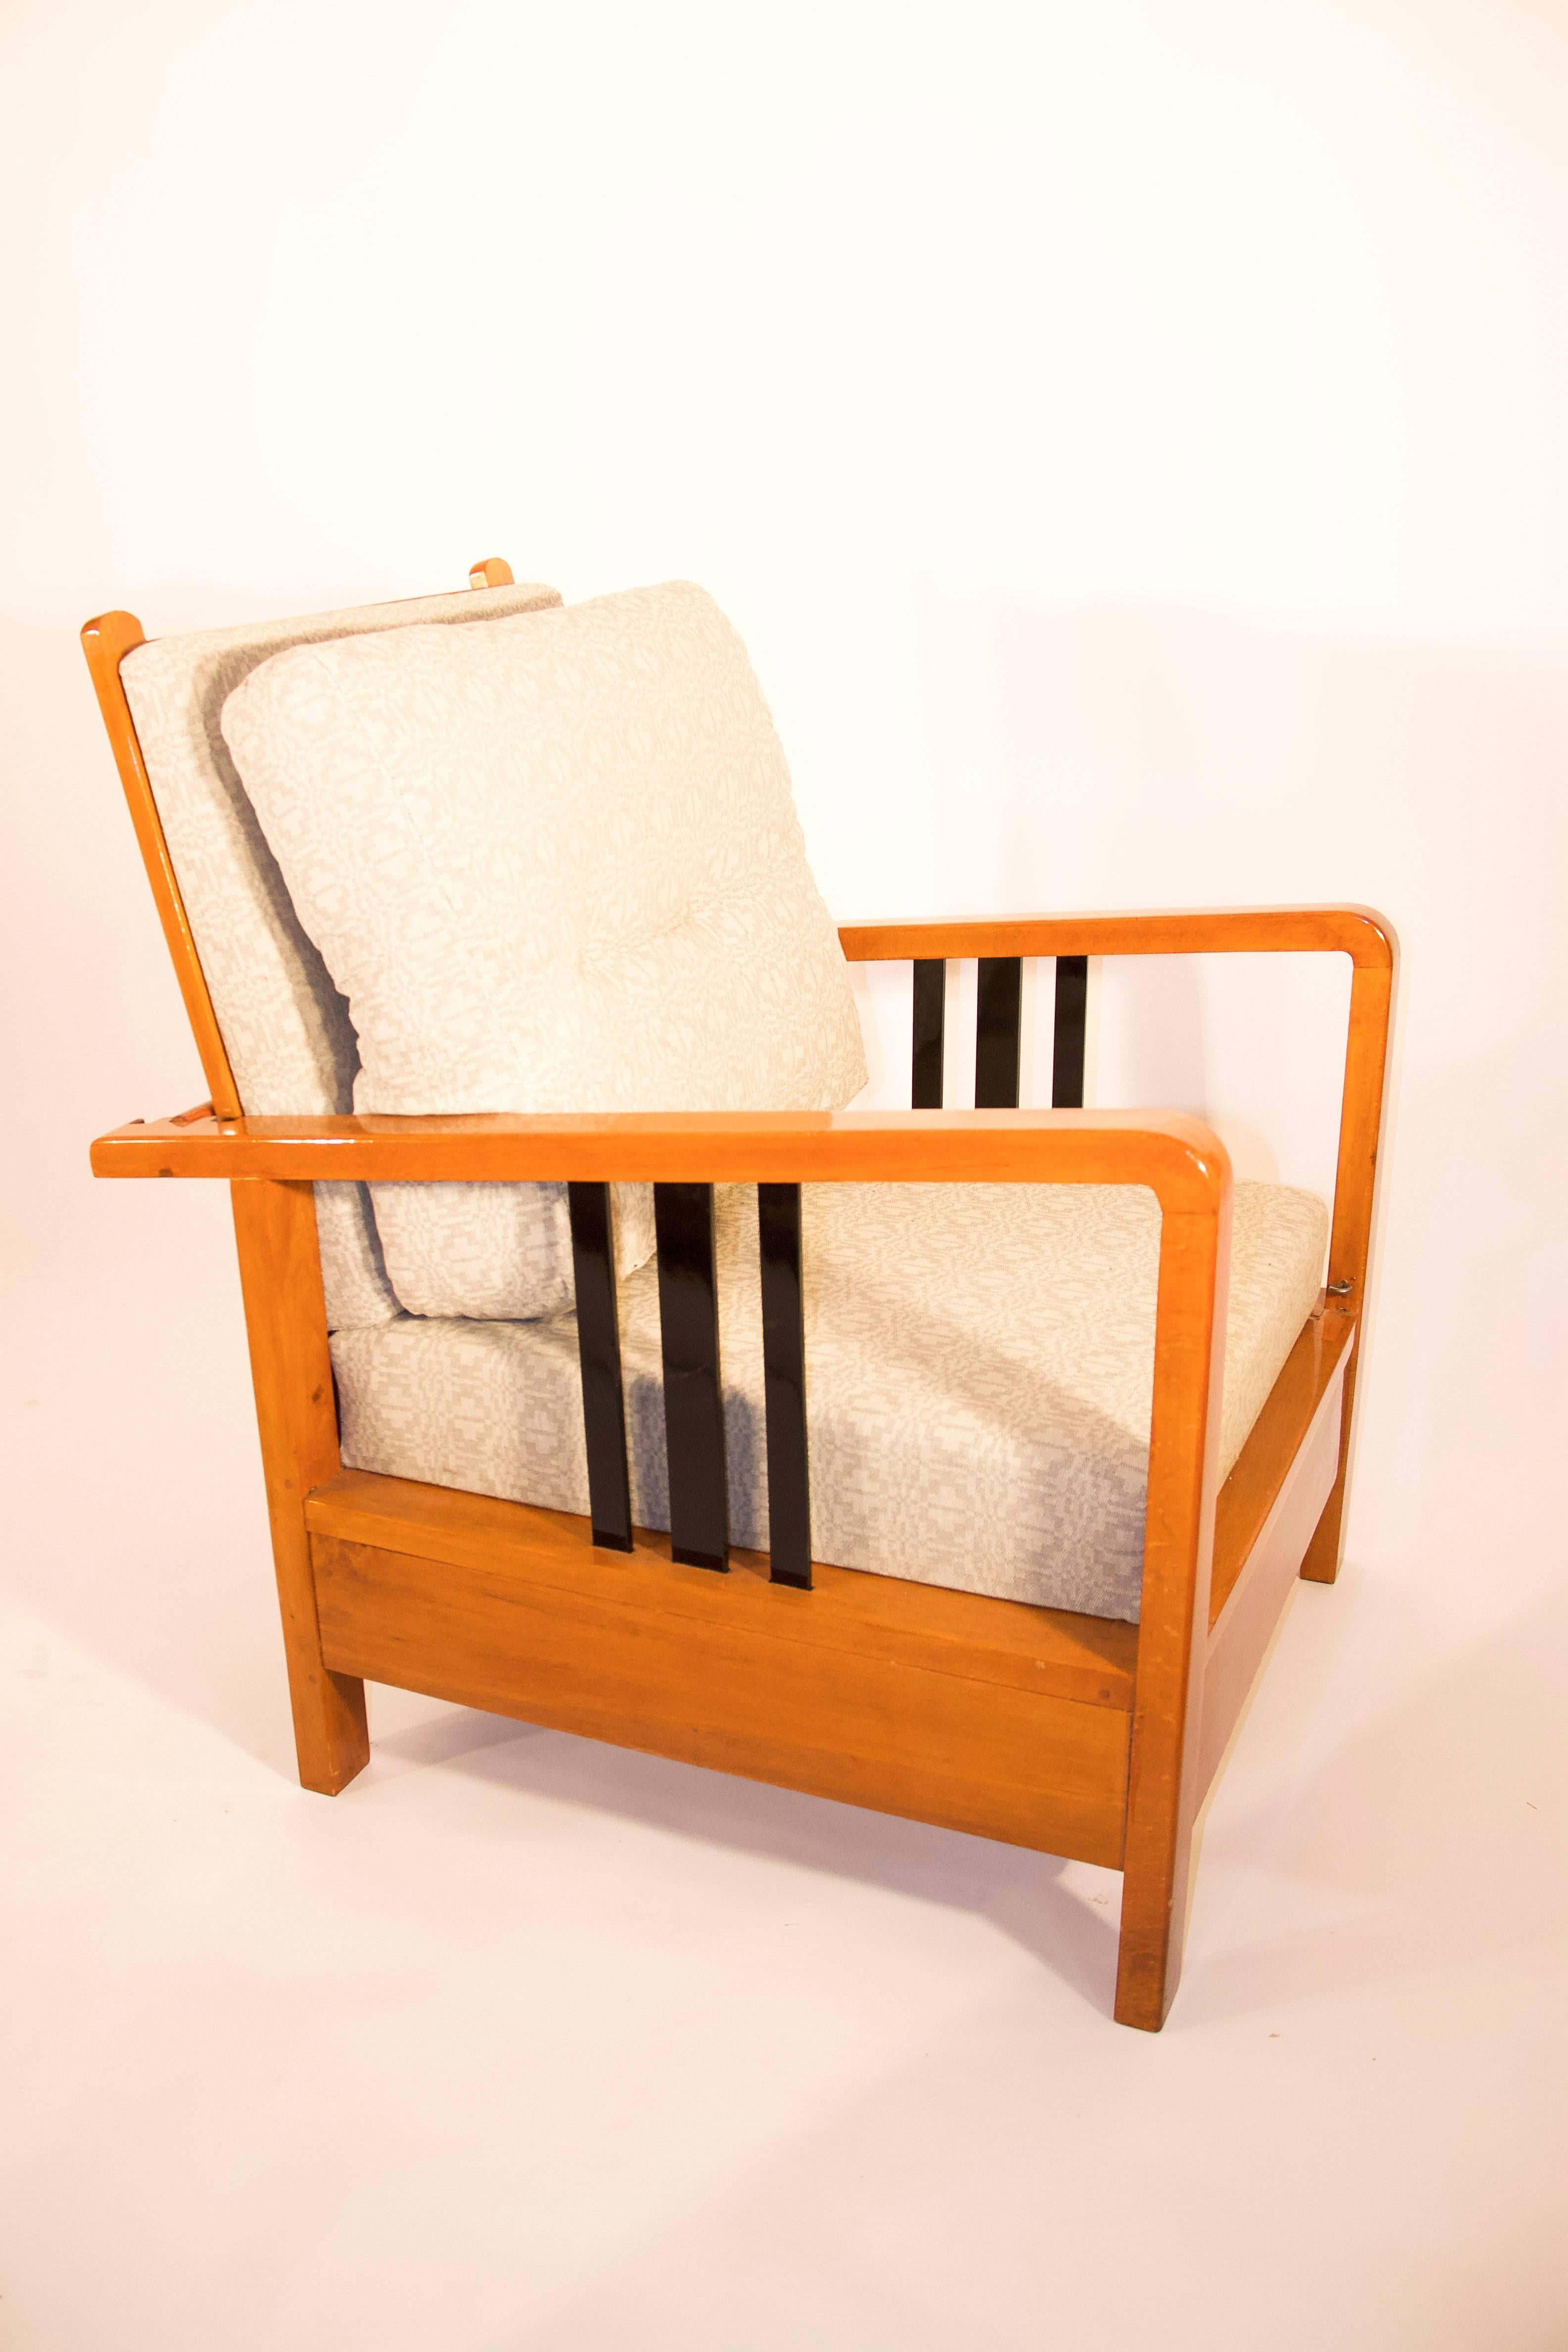 Rare, Kozma Lajos Art Deco Lounge Chair from the 1930s In Good Condition For Sale In Budapest, HU